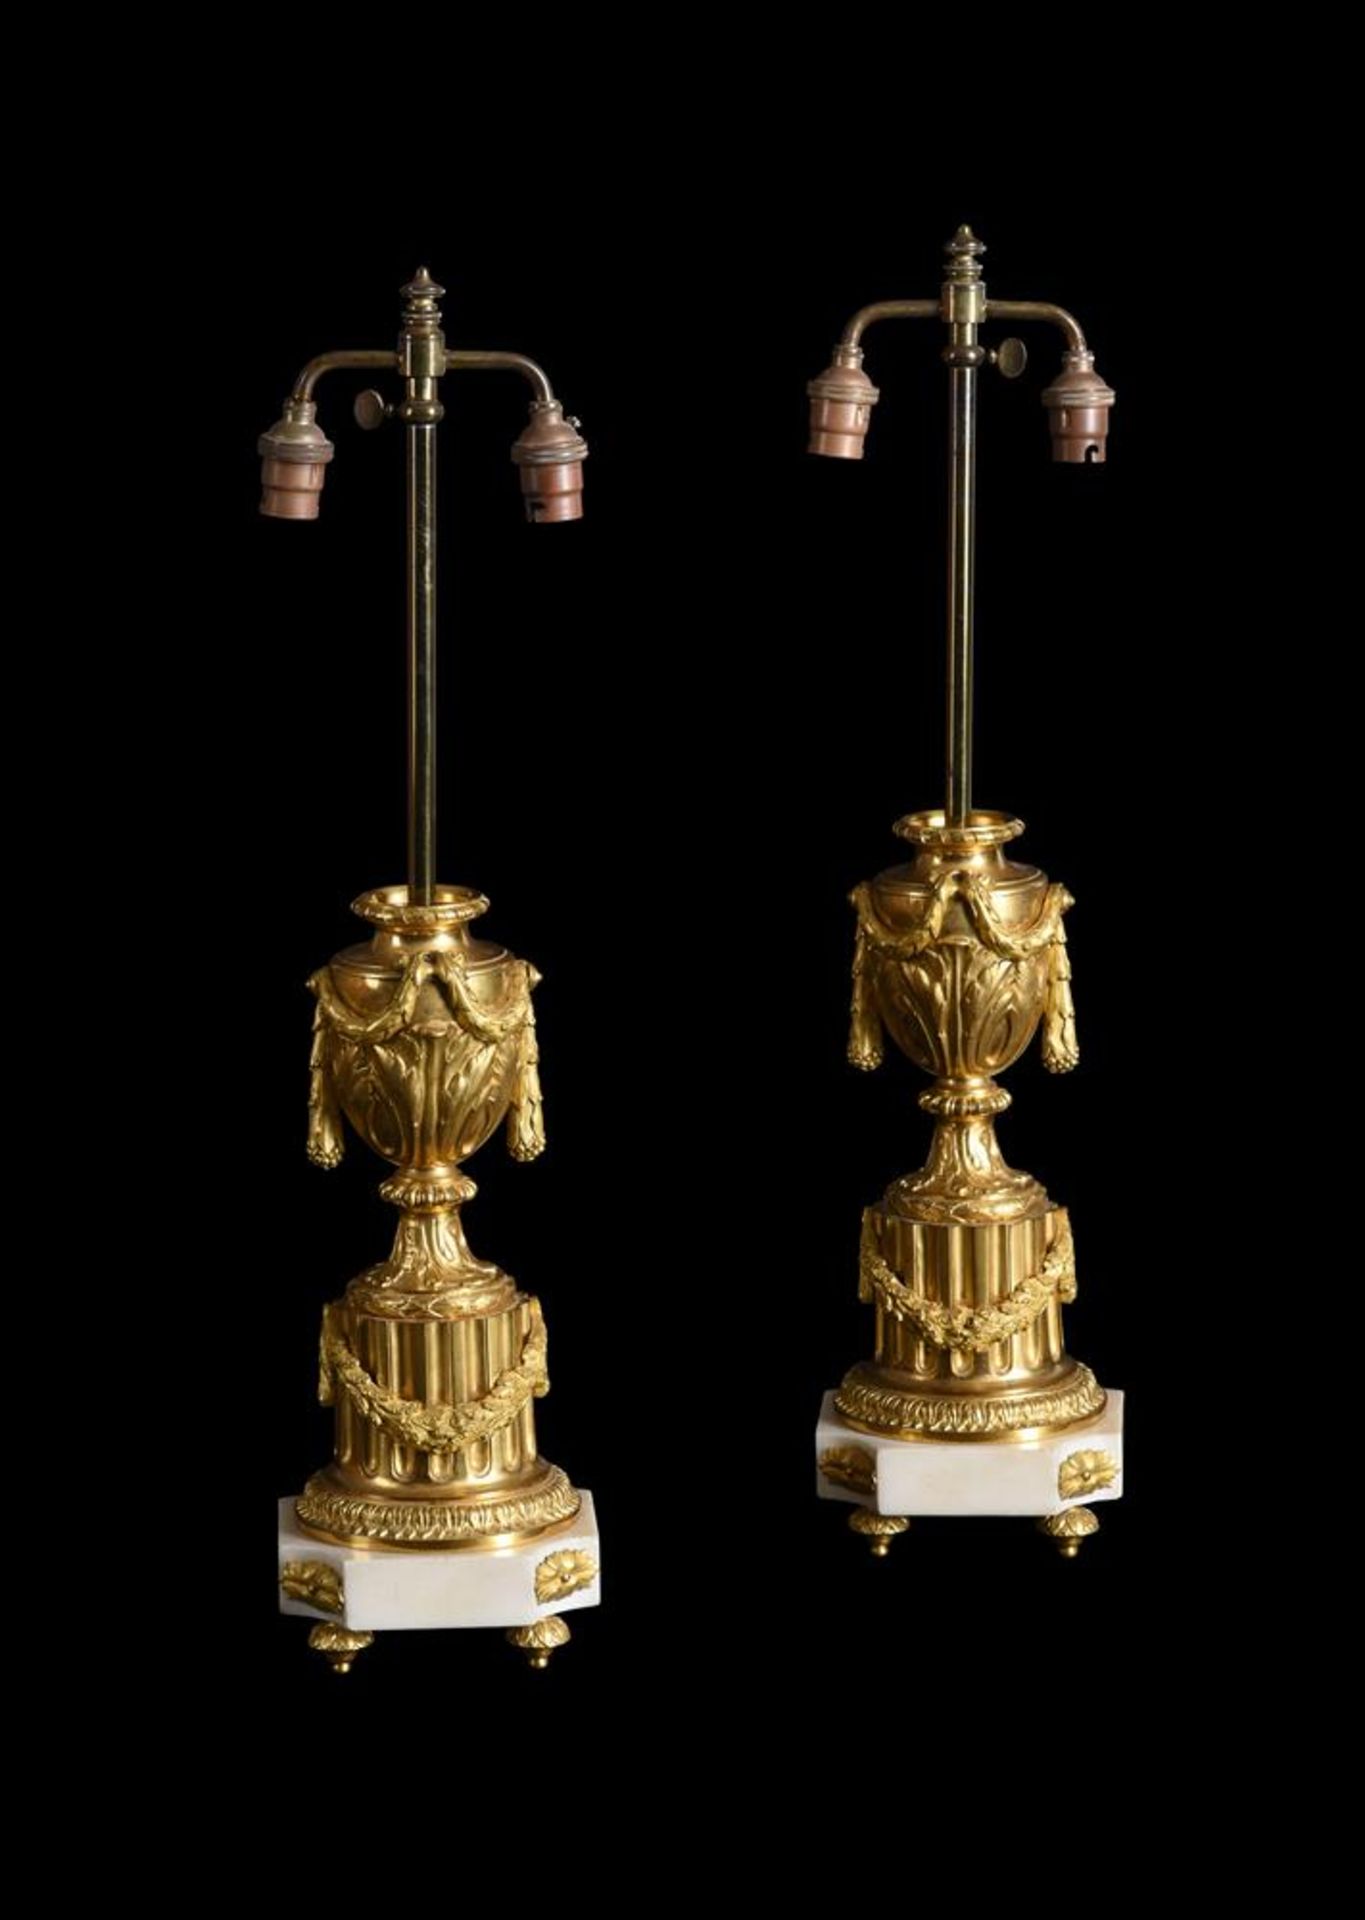 A PAIR OF GILT BRONZE AND MARBLE CLASSICAL URN TABLE LAMPS, FRENCH, 19TH CENTURY - Image 2 of 6